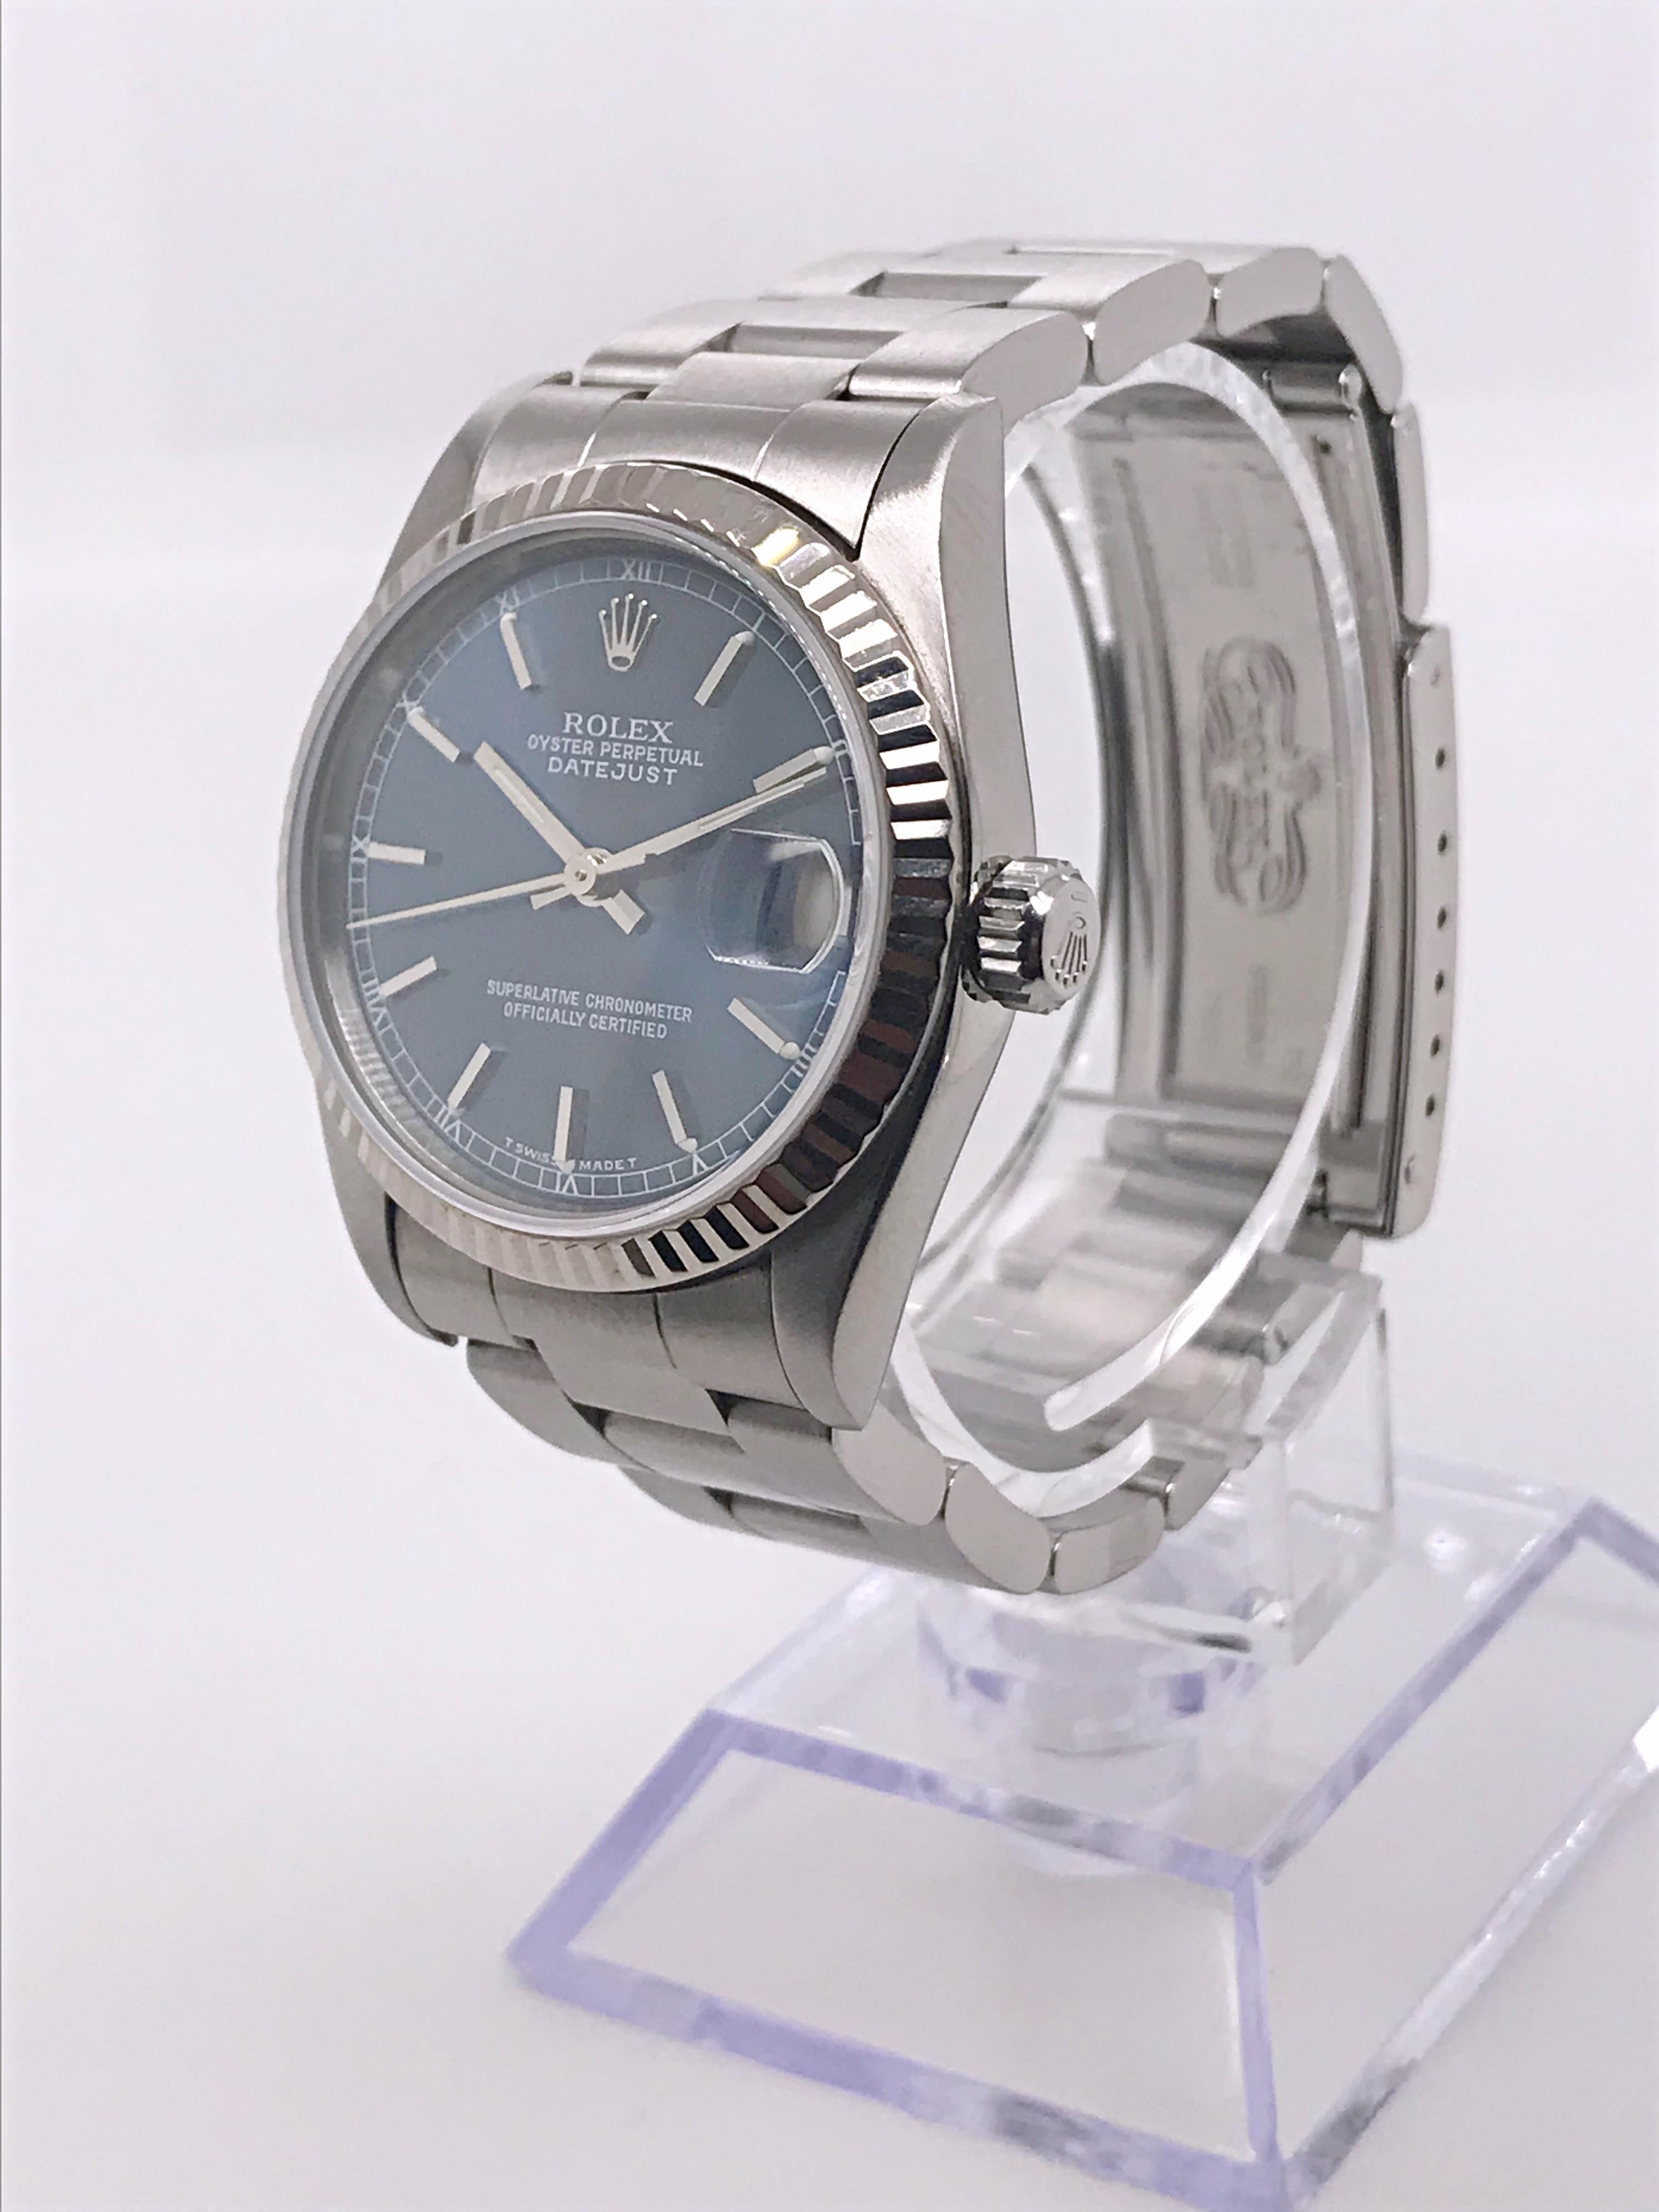 This Midsize Rolex is 31 mm and features an elegant blue dial along with a date function. This watch also has a quick set date function and is on an oyster bracelet made from stainless steel. The bezel is 18kt white gold, fluted style. Circa 1998